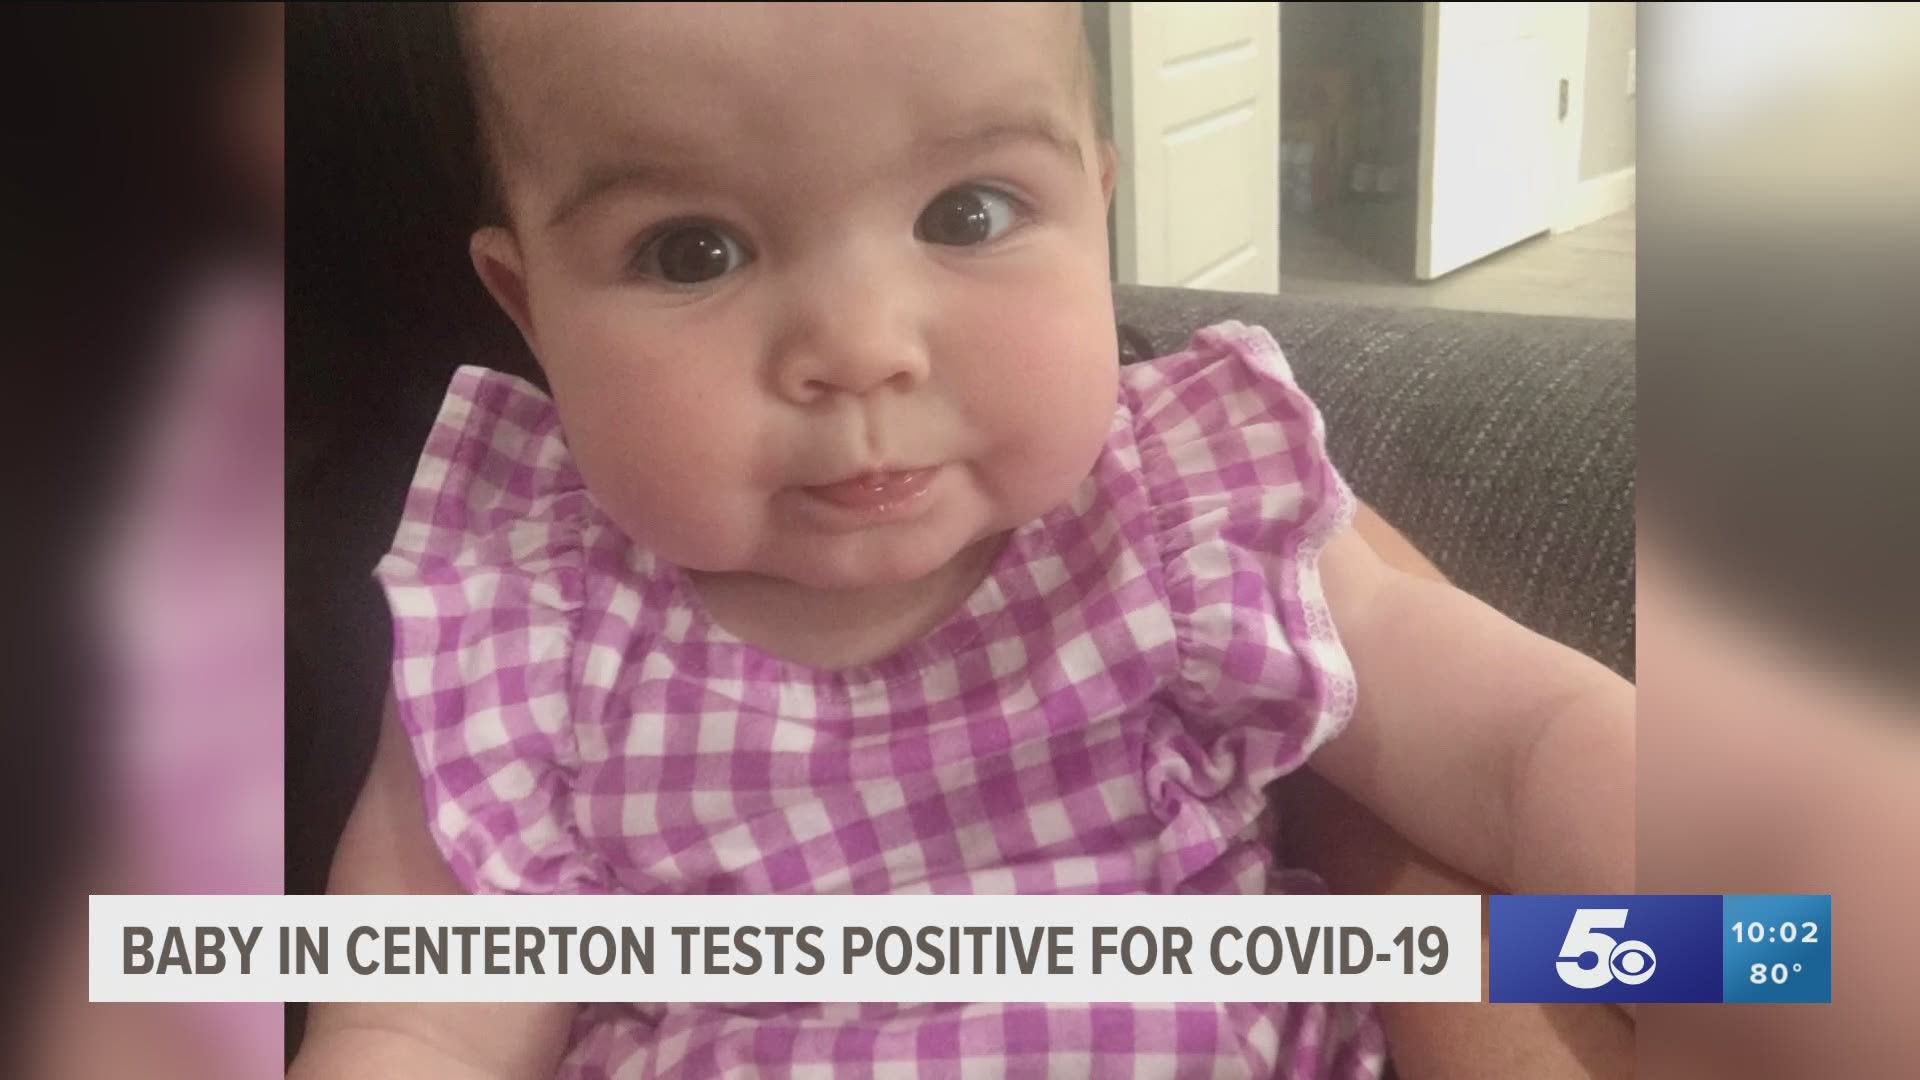 One Centerton family is praying no symptoms arise tonight after their 5-month-old baby girl tested positive for COVID-19. https://bit.ly/2WkAt8I